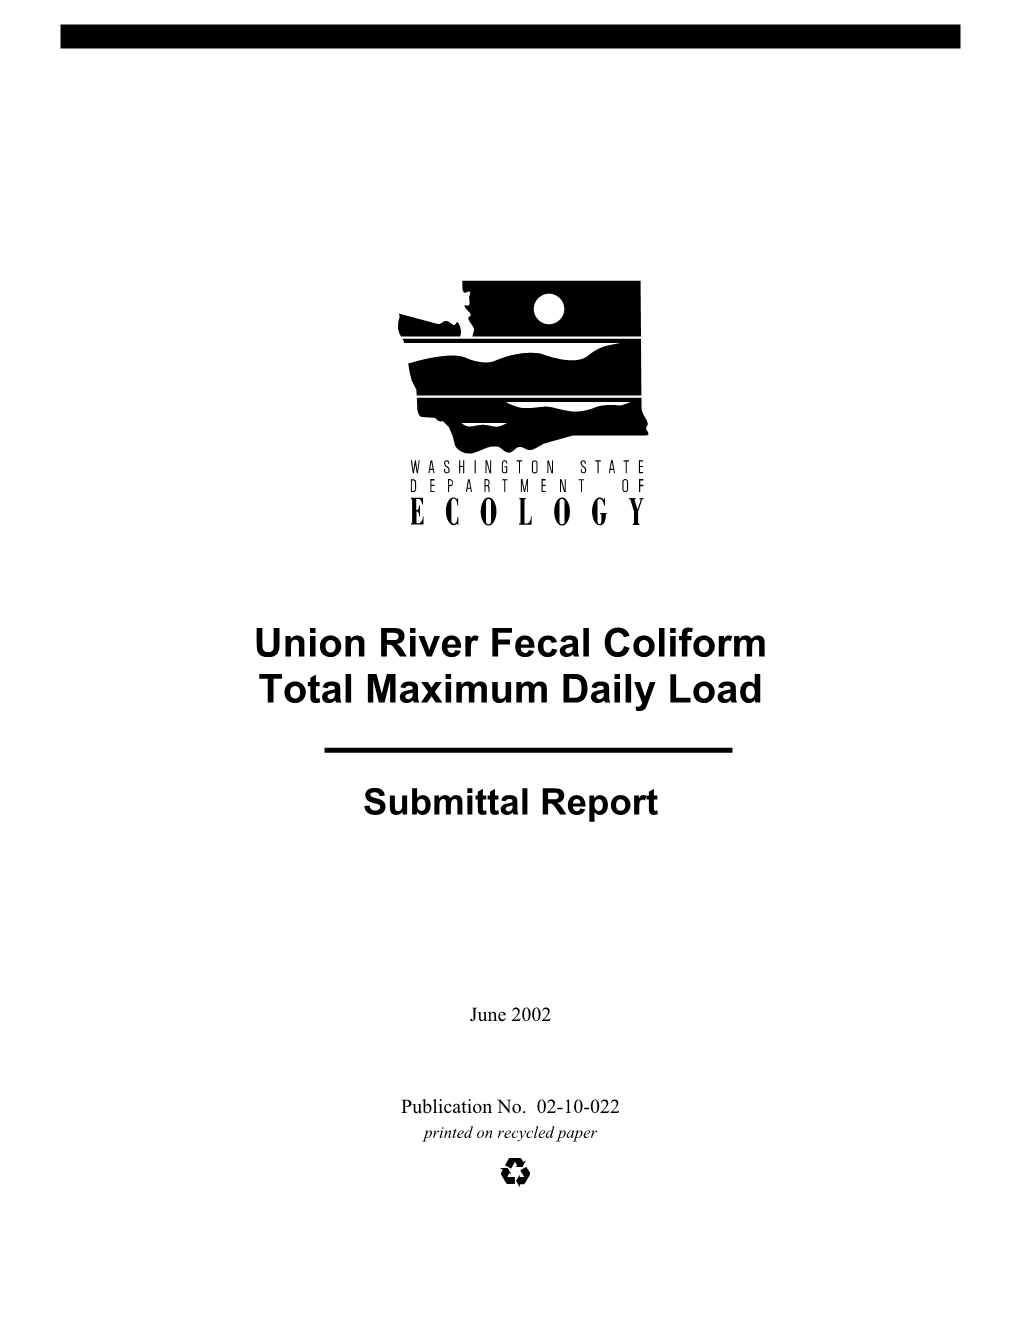 Union River Fecal Coliform TMDL Submittal Report